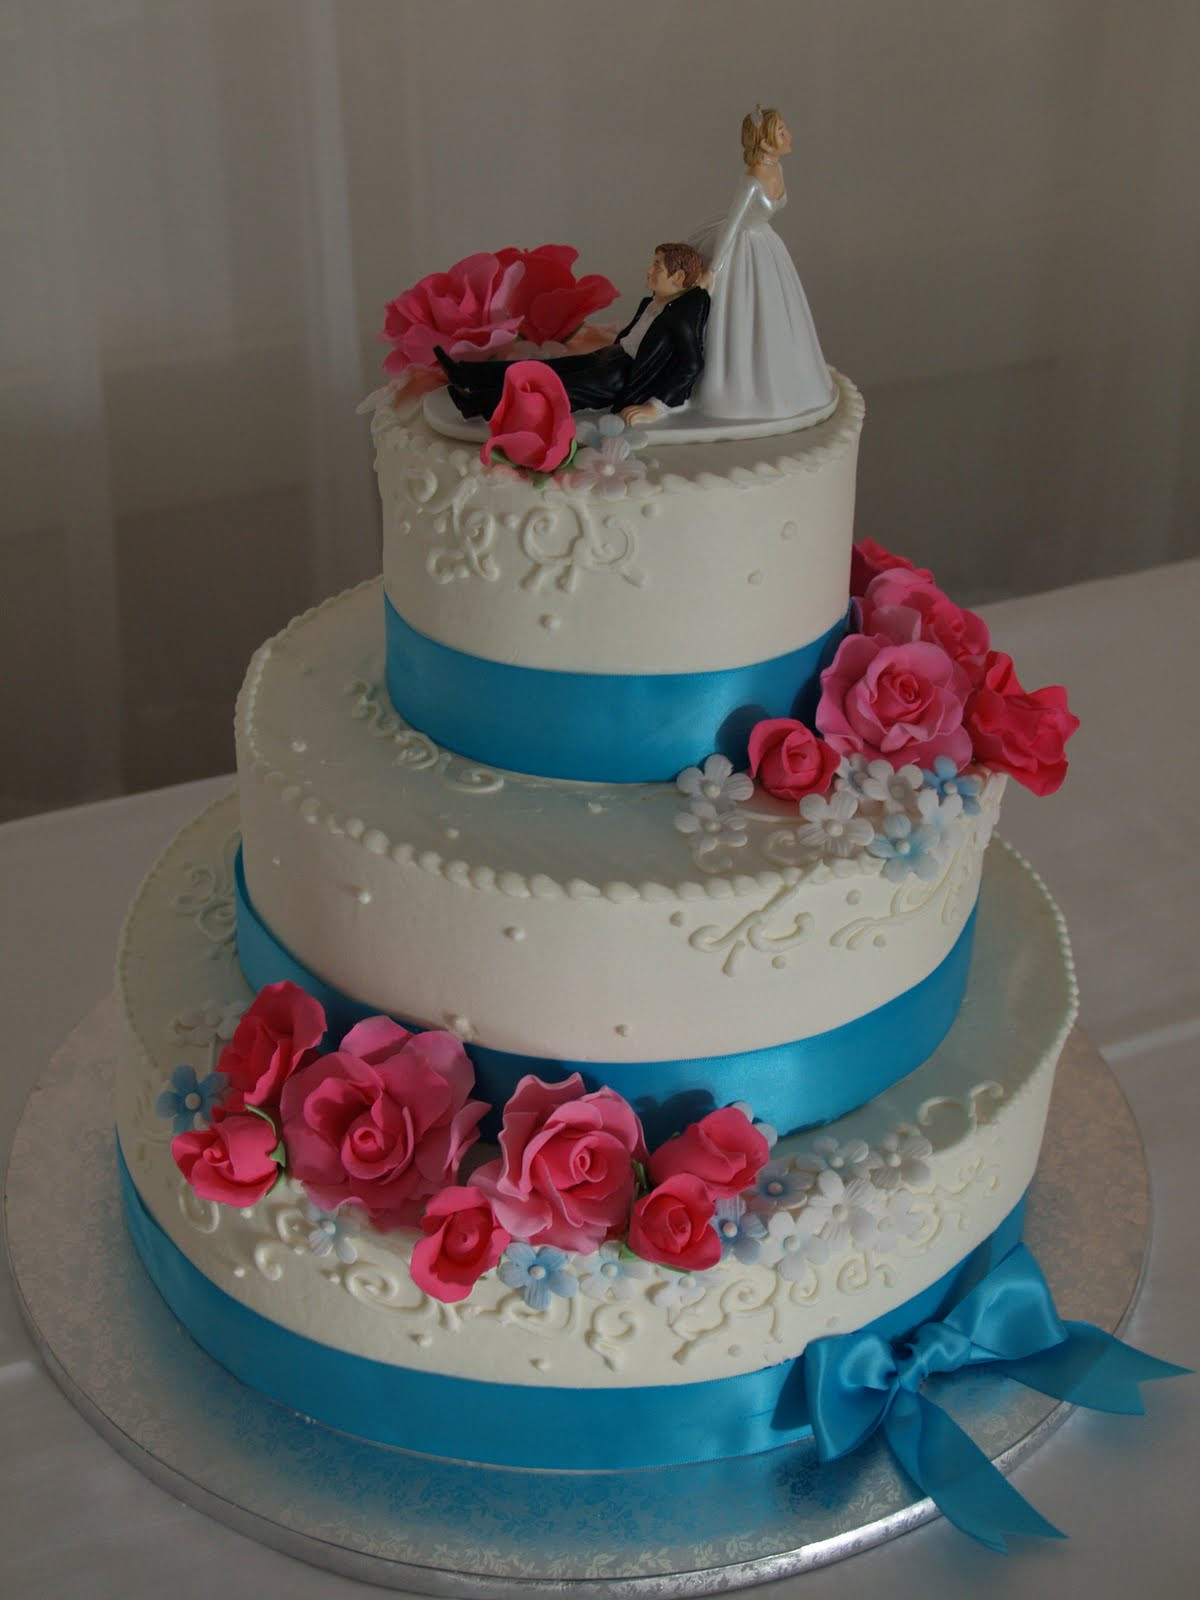 Turquoise Wedding Cake
 Becky s Sweets Hot Pink Turquoise wedding cake